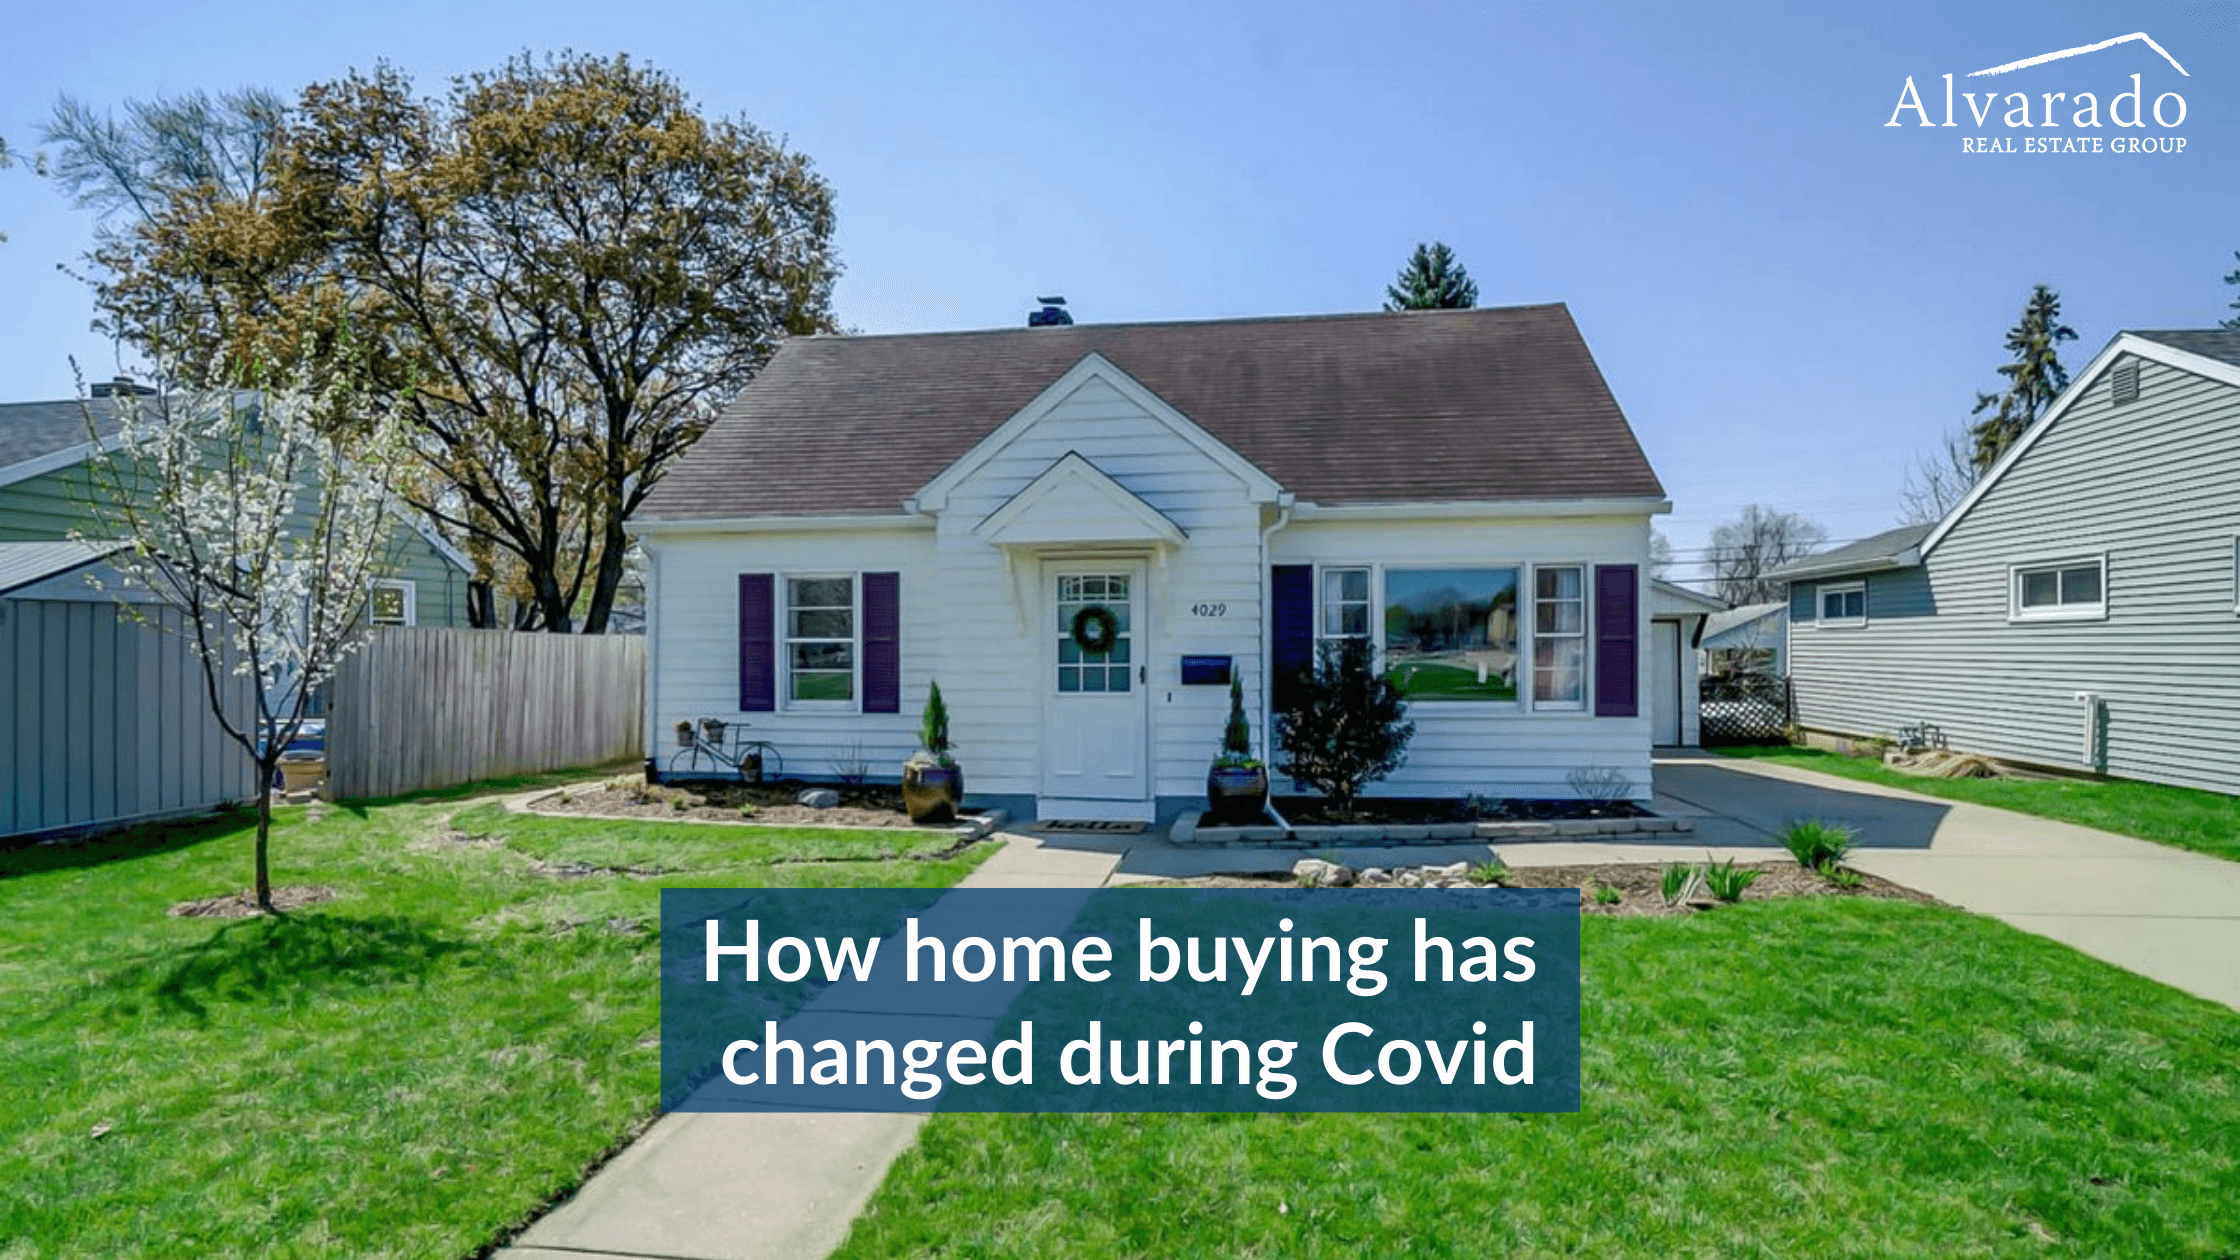 How home buying has changed during Covid